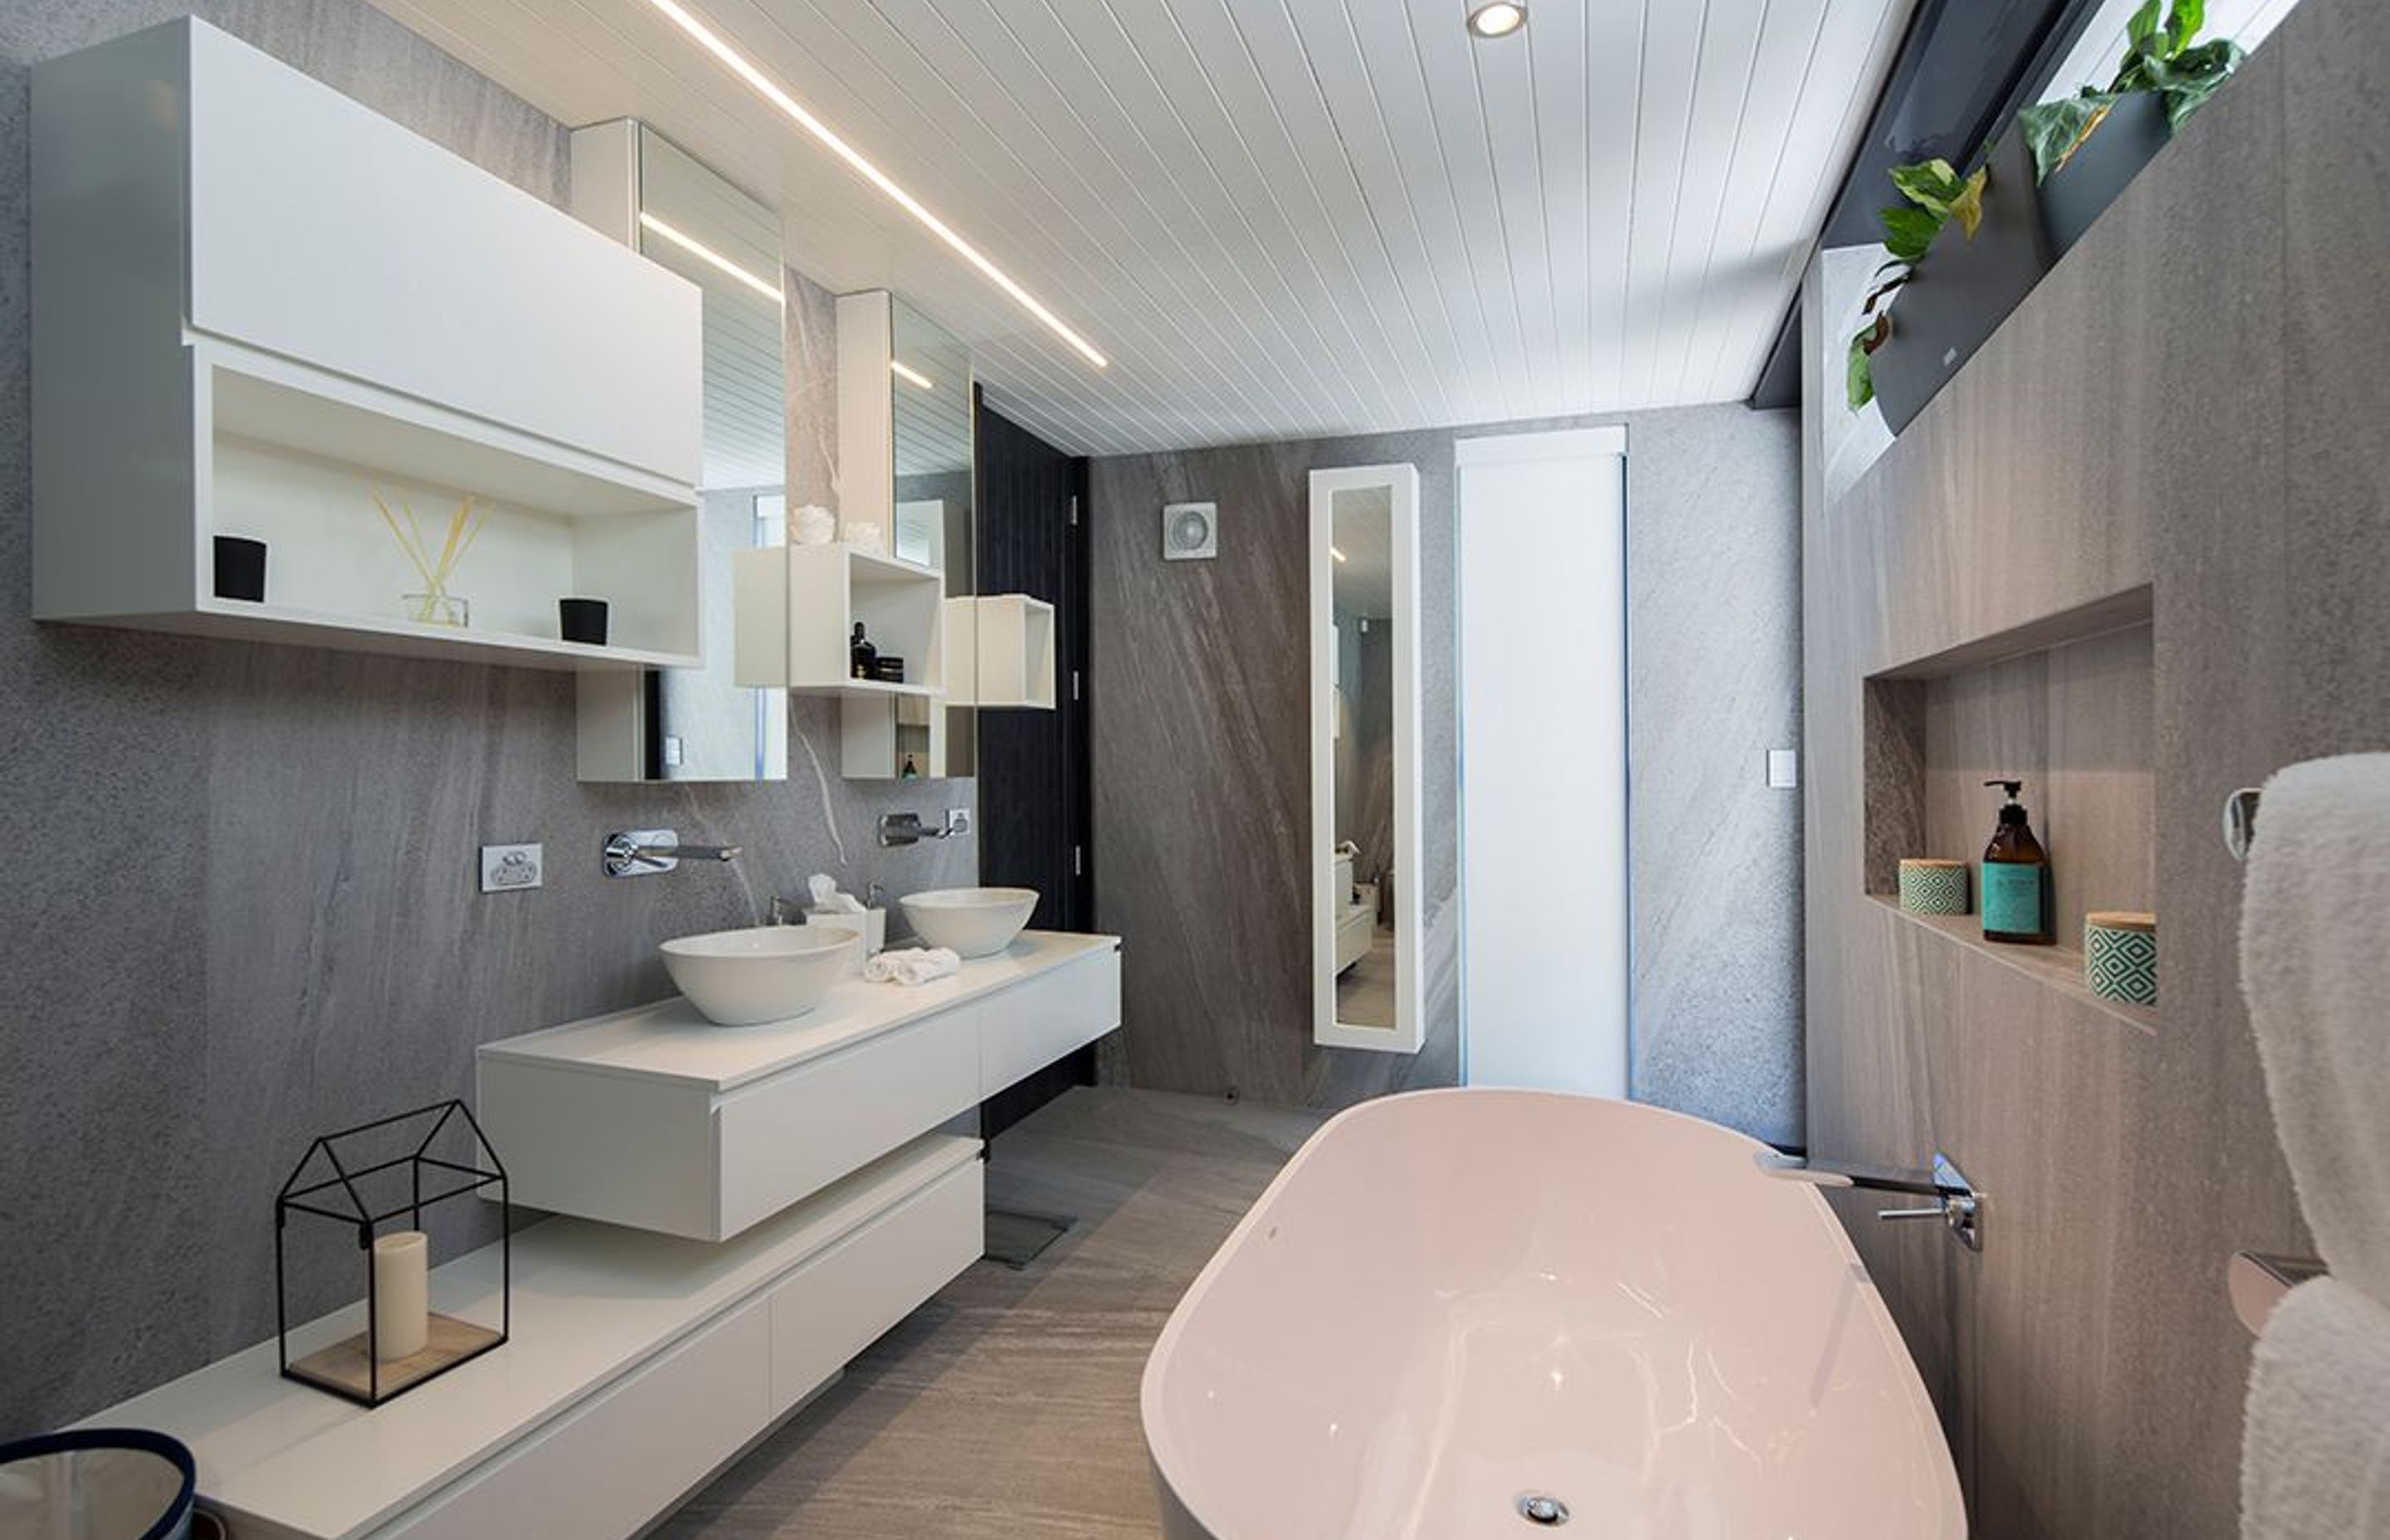 The ensuite bathroom is crisp and clean in grey stone and white. White stone bath, basins, joinery and ceilings reflect a minimalist colour palette.